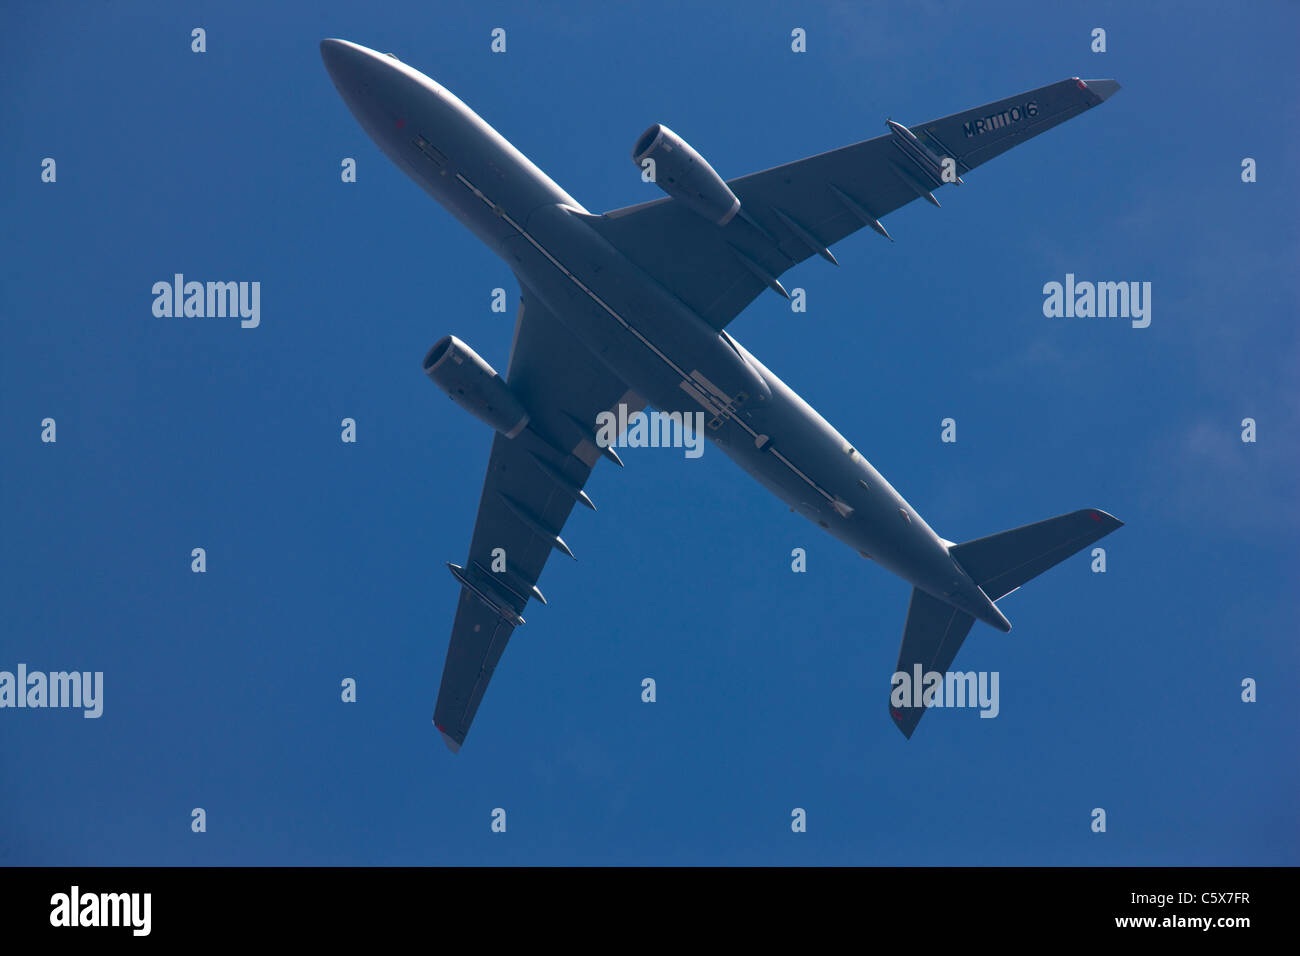 Military aircraft flying overhead Stock Photo